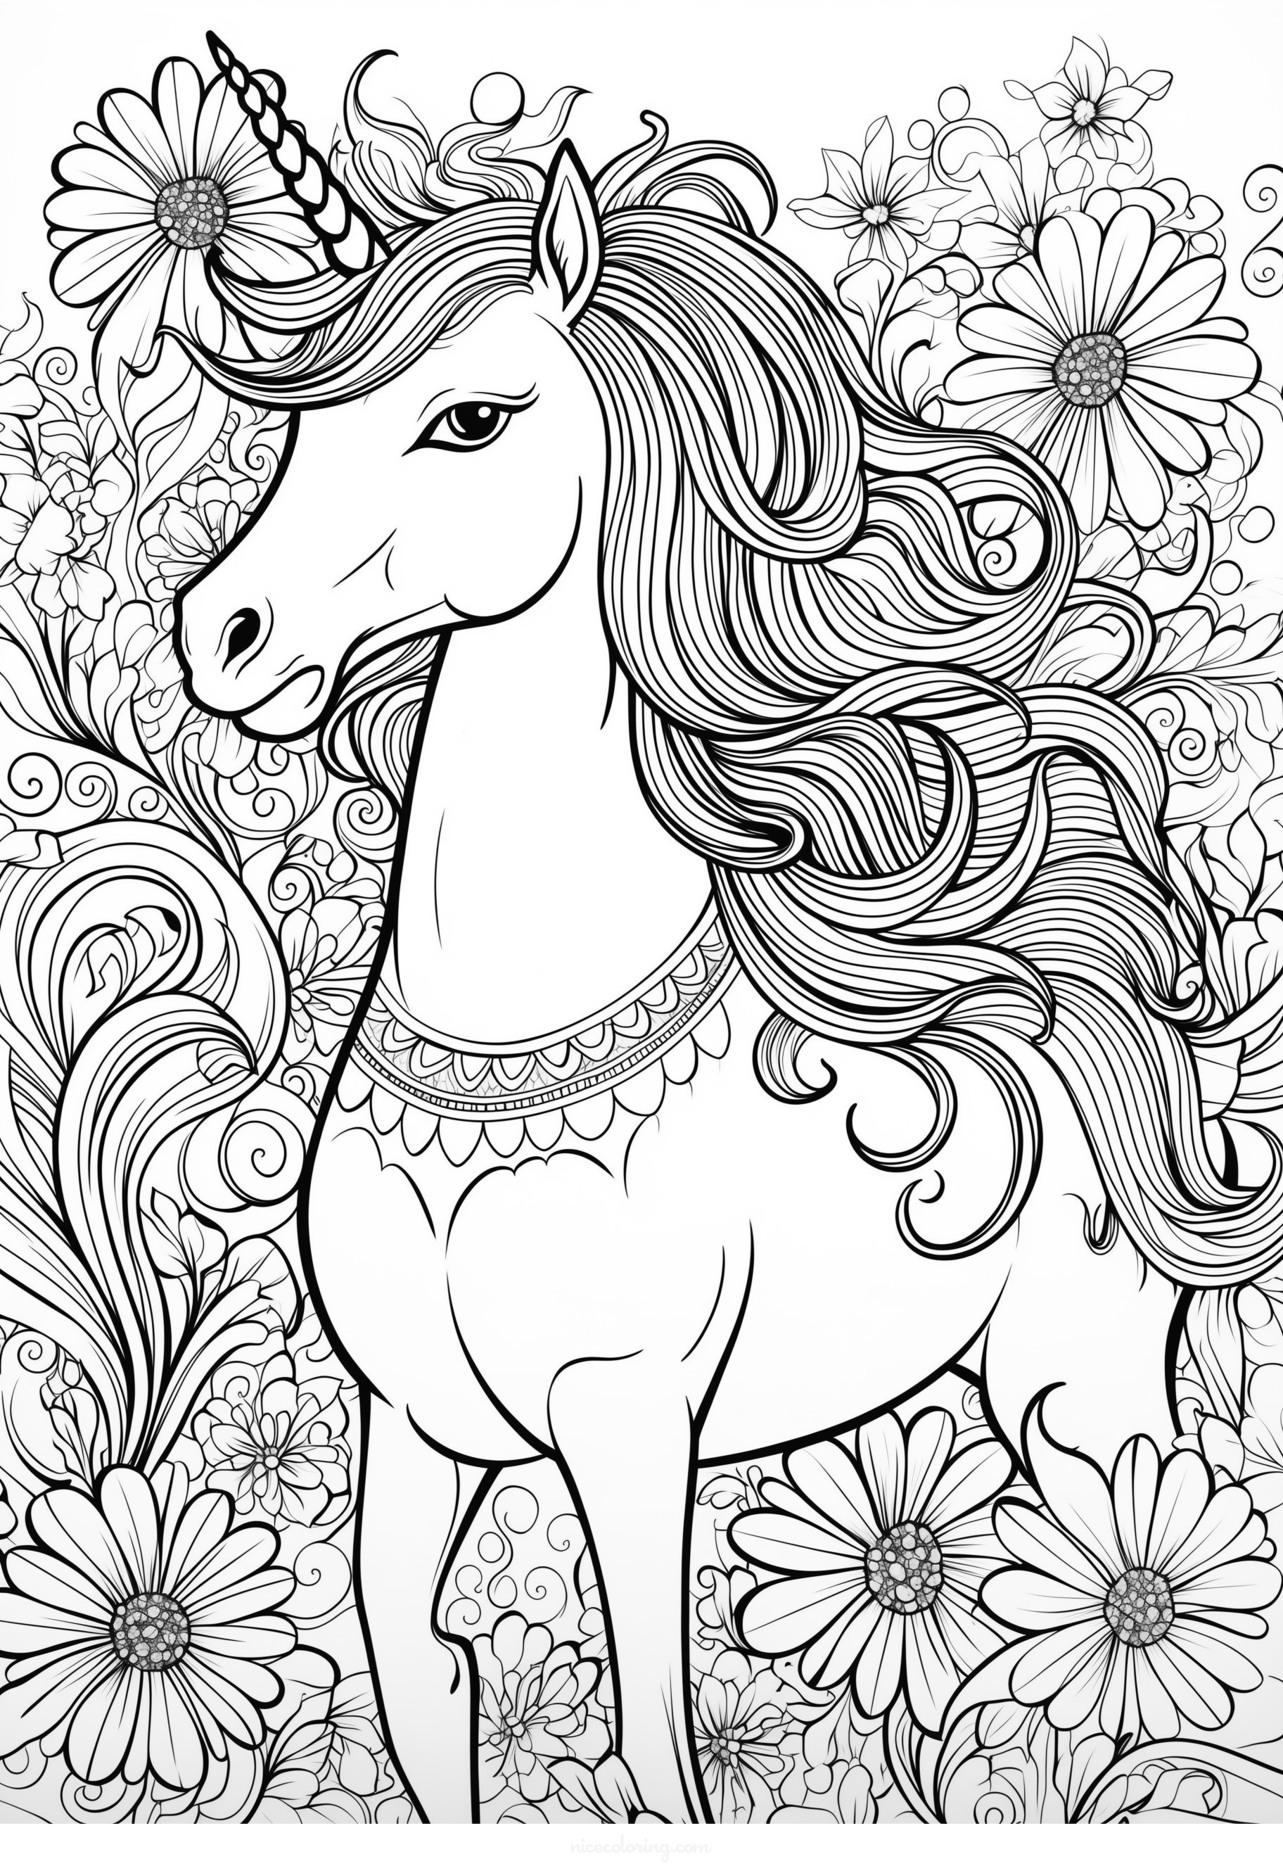 A majestic unicorn surrounded by flowers and hearts coloring page